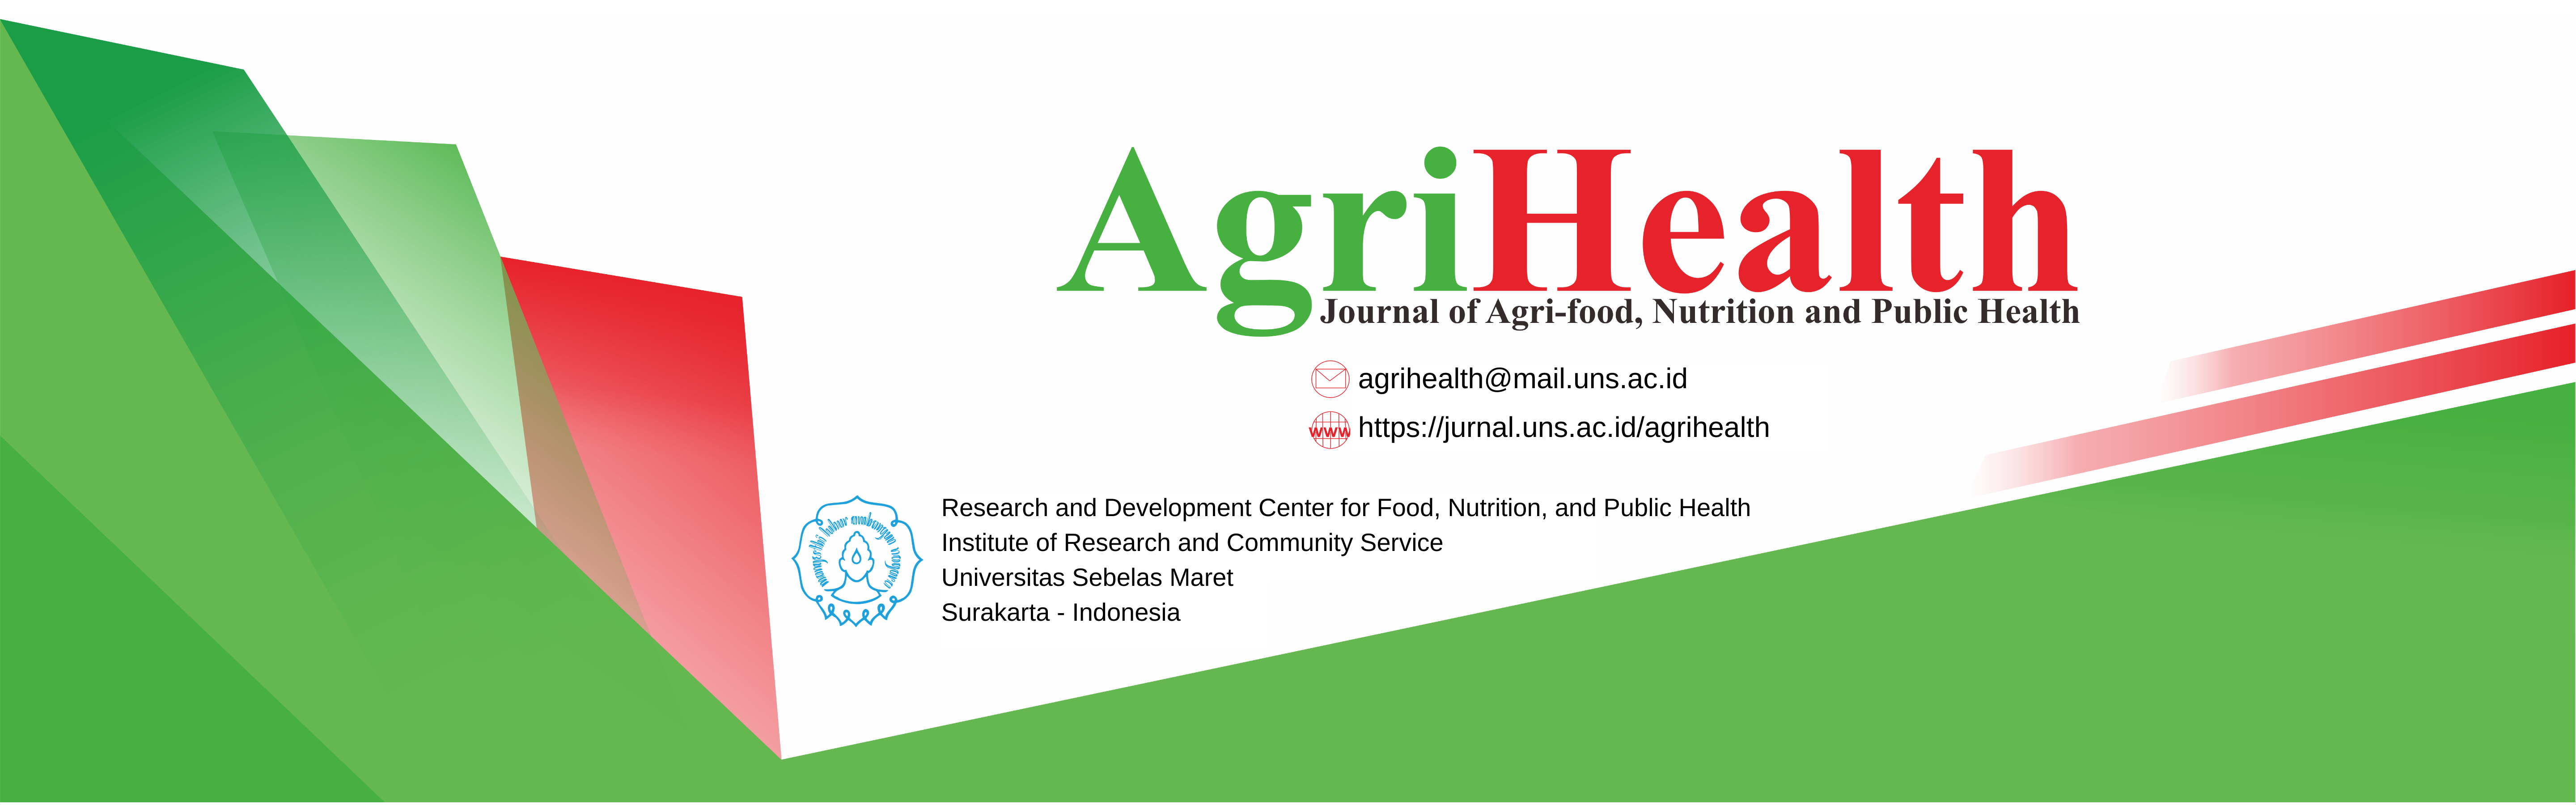 AgriHealth: Journal of Agri-food, Nutrition and Public Health